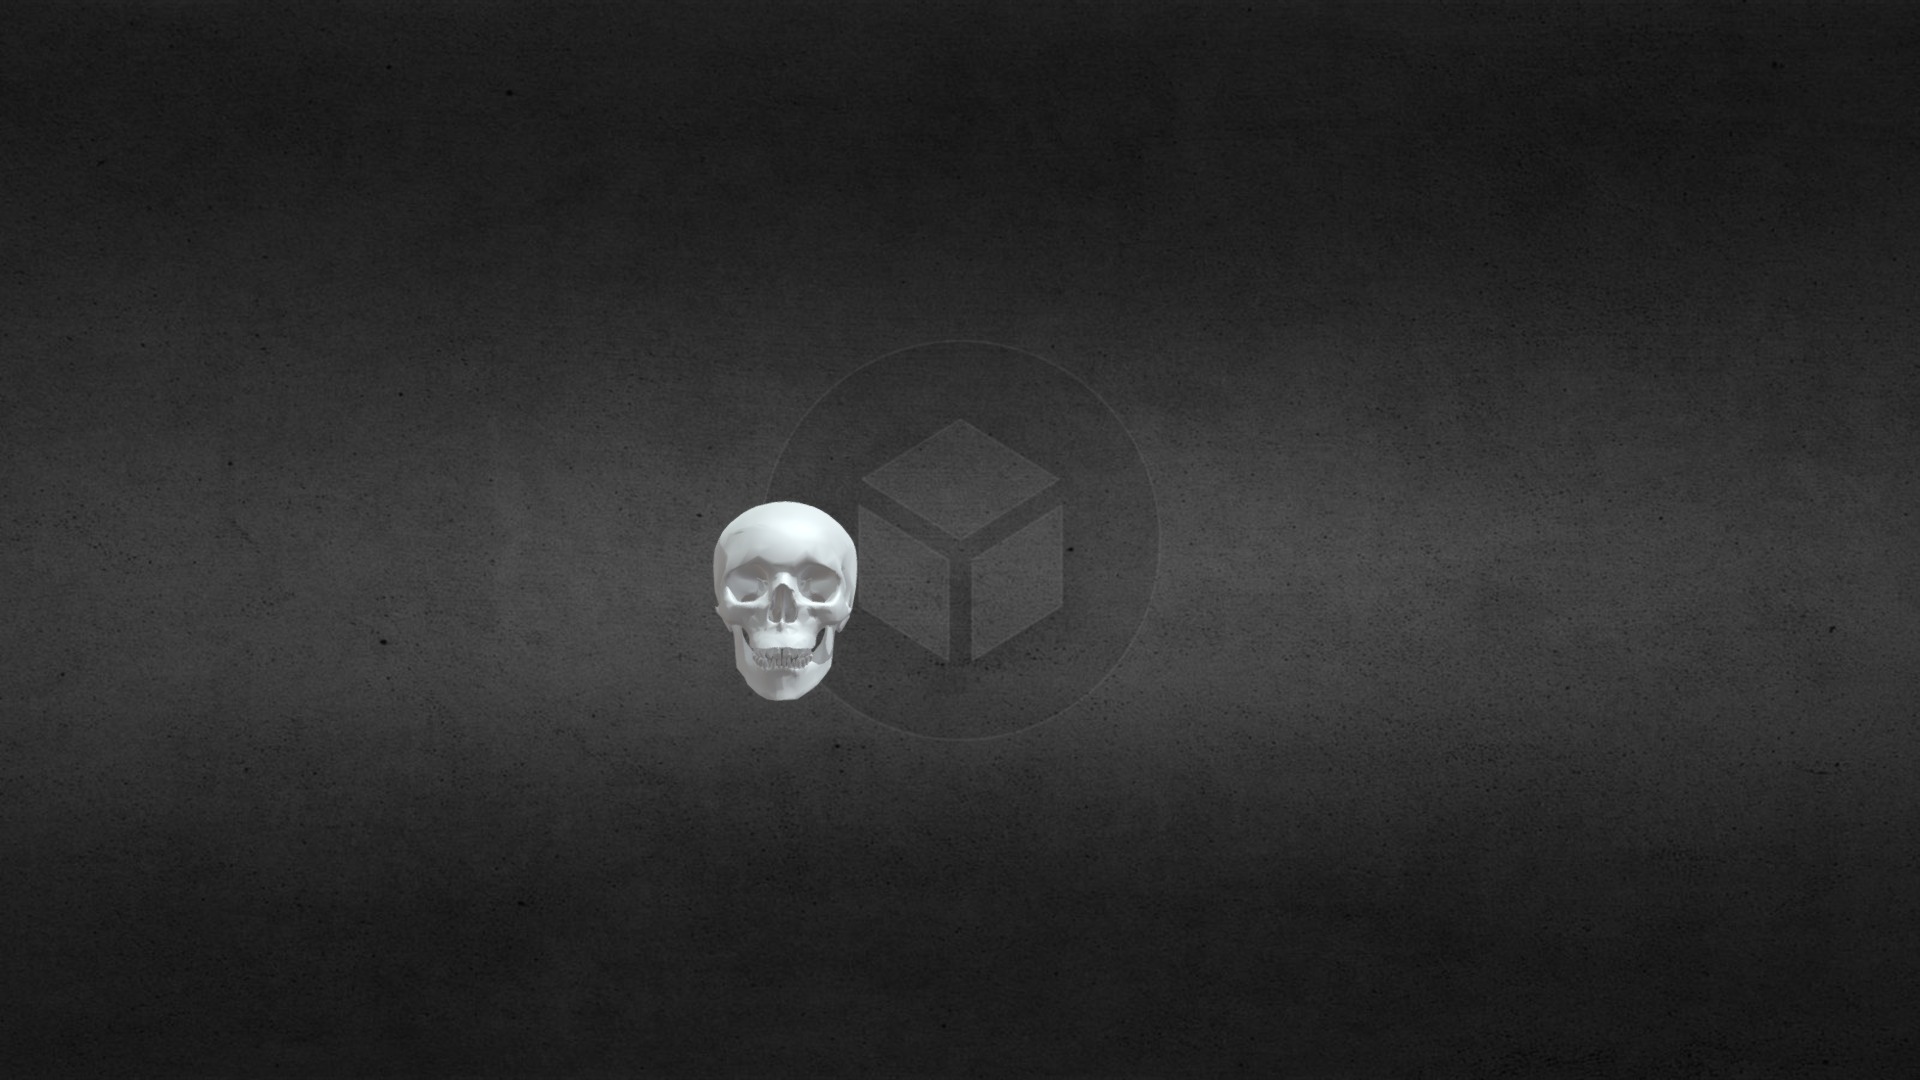 3D model low poly Skull - This is a 3D model of the low poly Skull. The 3D model is about a light bulb on a table.